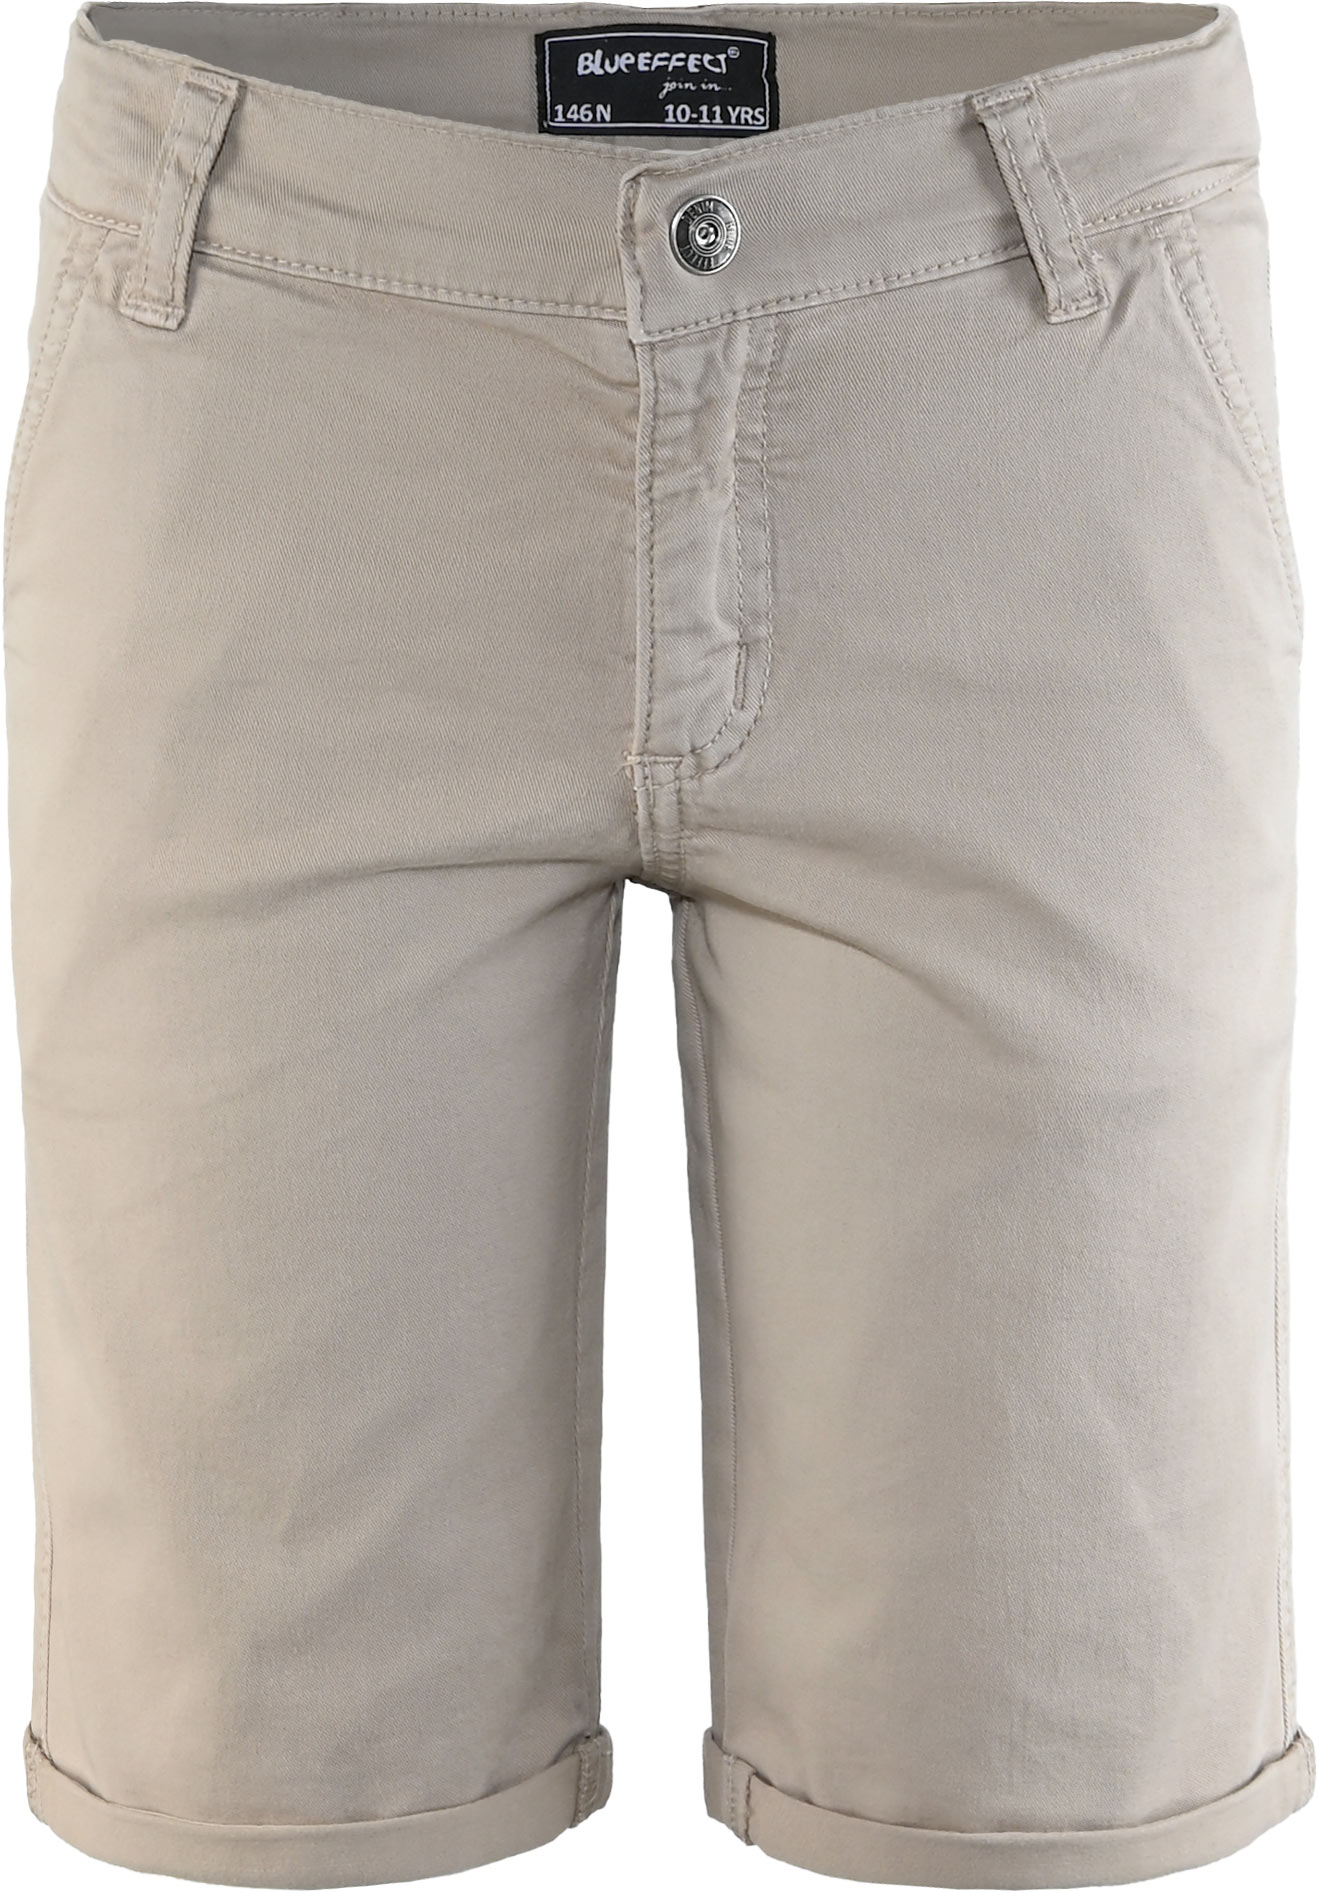 4278-Boys Chino Short available in Slim,Normal